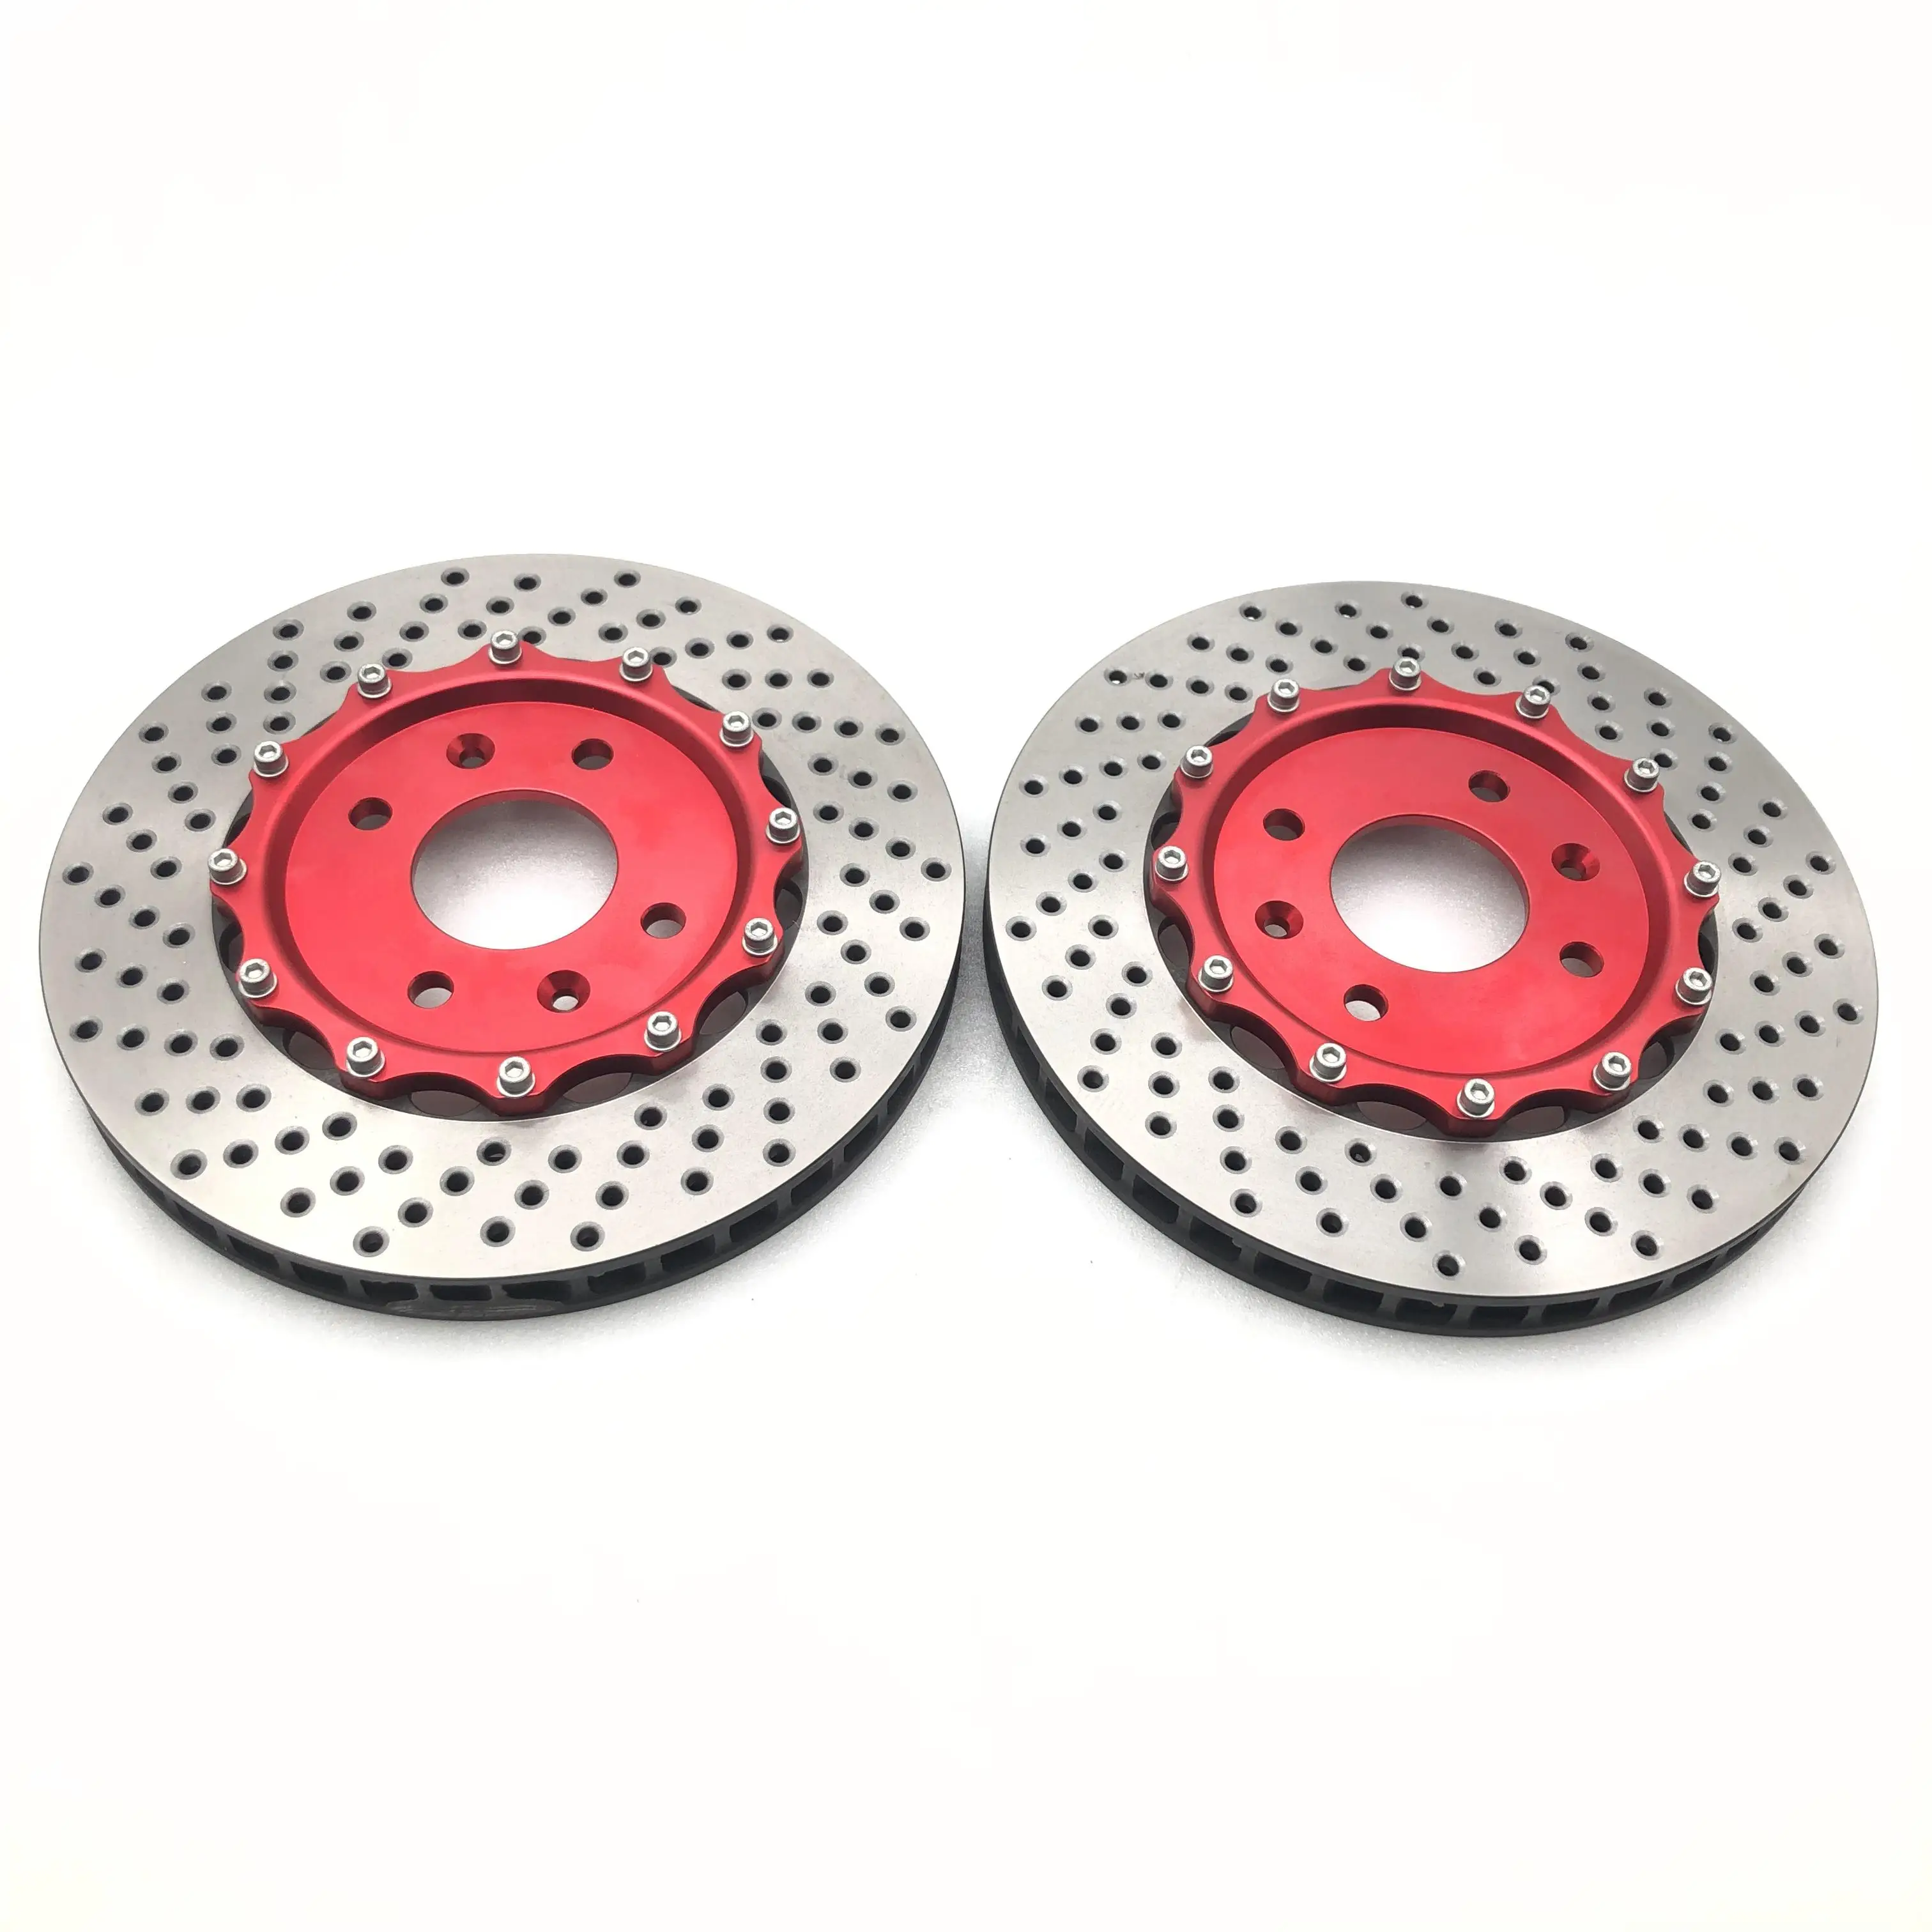 

Jekit car brake part rear enlarged disc 355*22mm drilled slot with bell fit for-benz c300-c205 vin wddwj8dbxkf922704